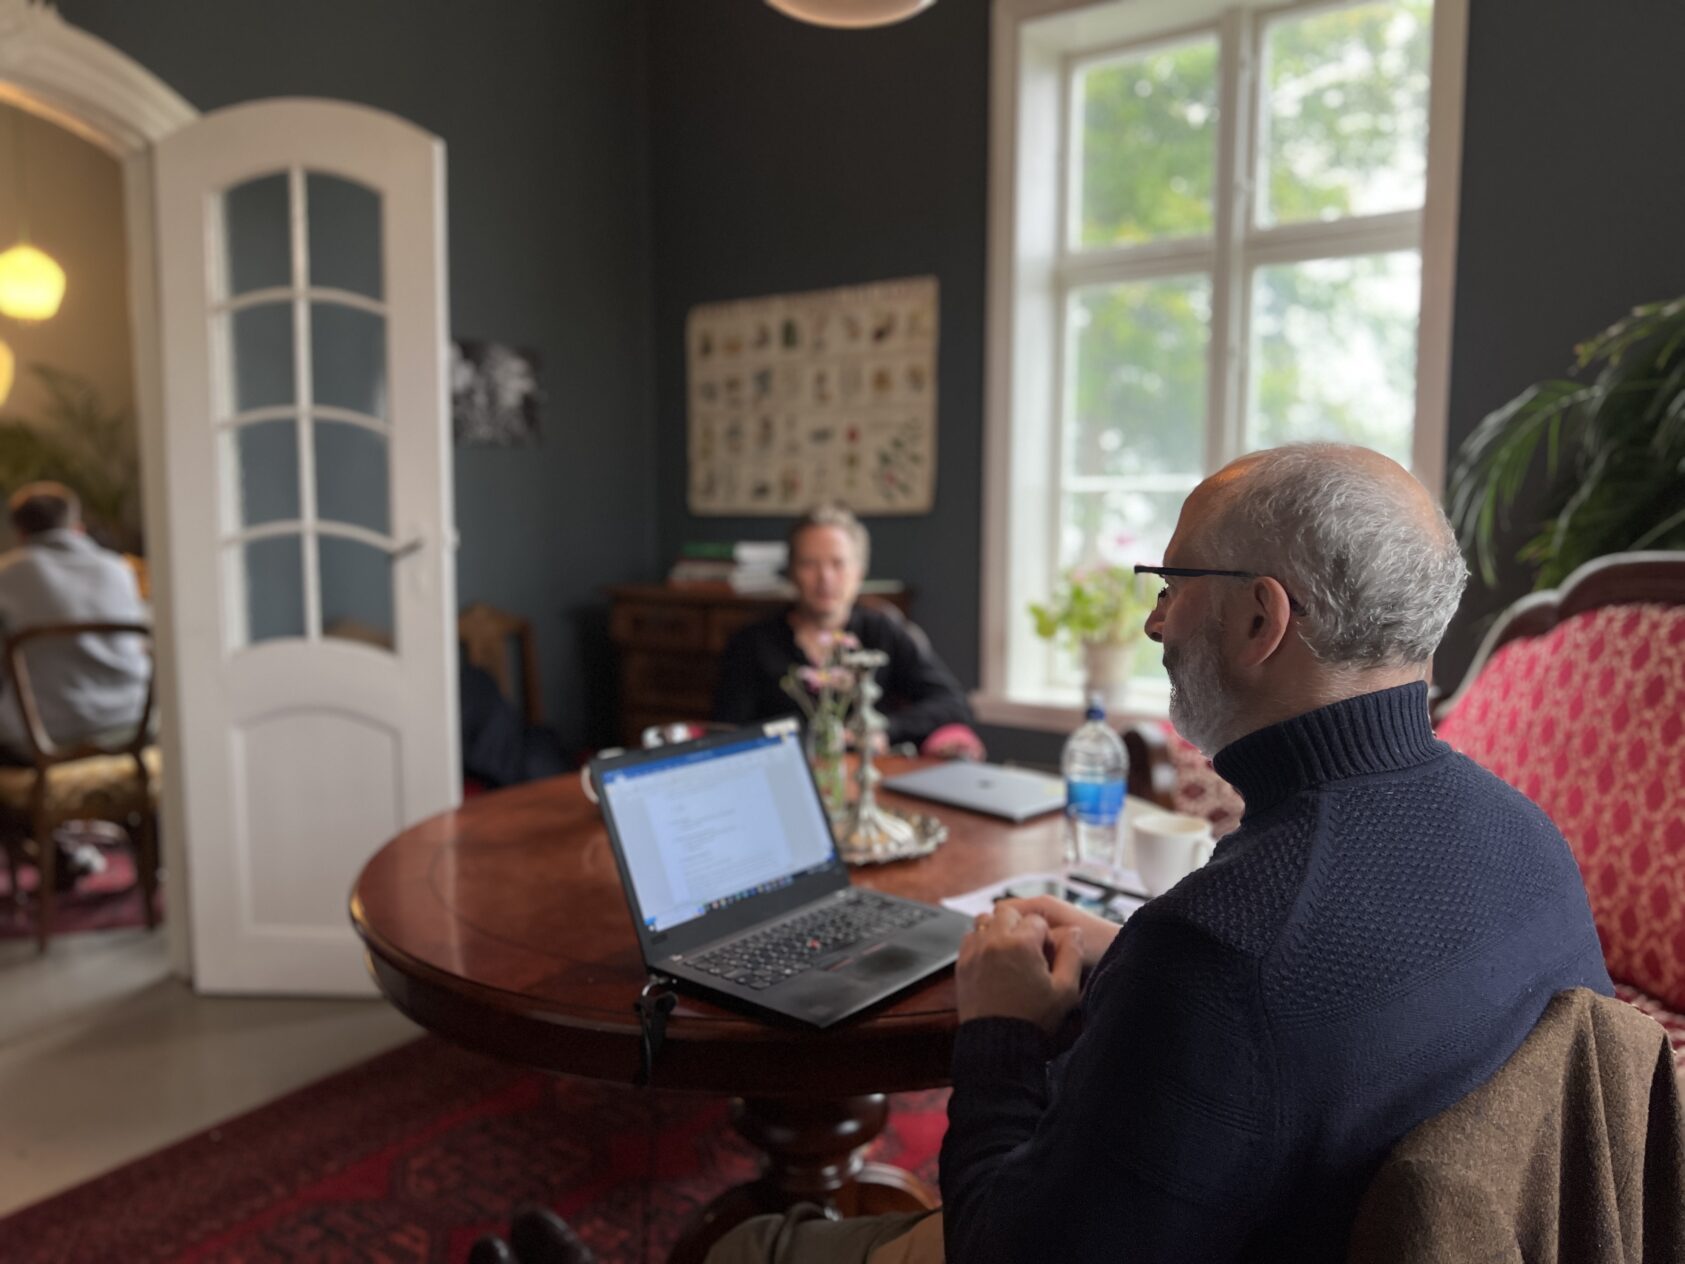 Gunn Janne Myrseth, NORCE, Erik Kolstad from NORCE and the Bjerknes Centre for Climate Research during a CONFER workshop at Lysthuset in Landås, Bergen, together with Douglas J. Parker from NORCE and the  University of Leeds., IMG 8491, , 